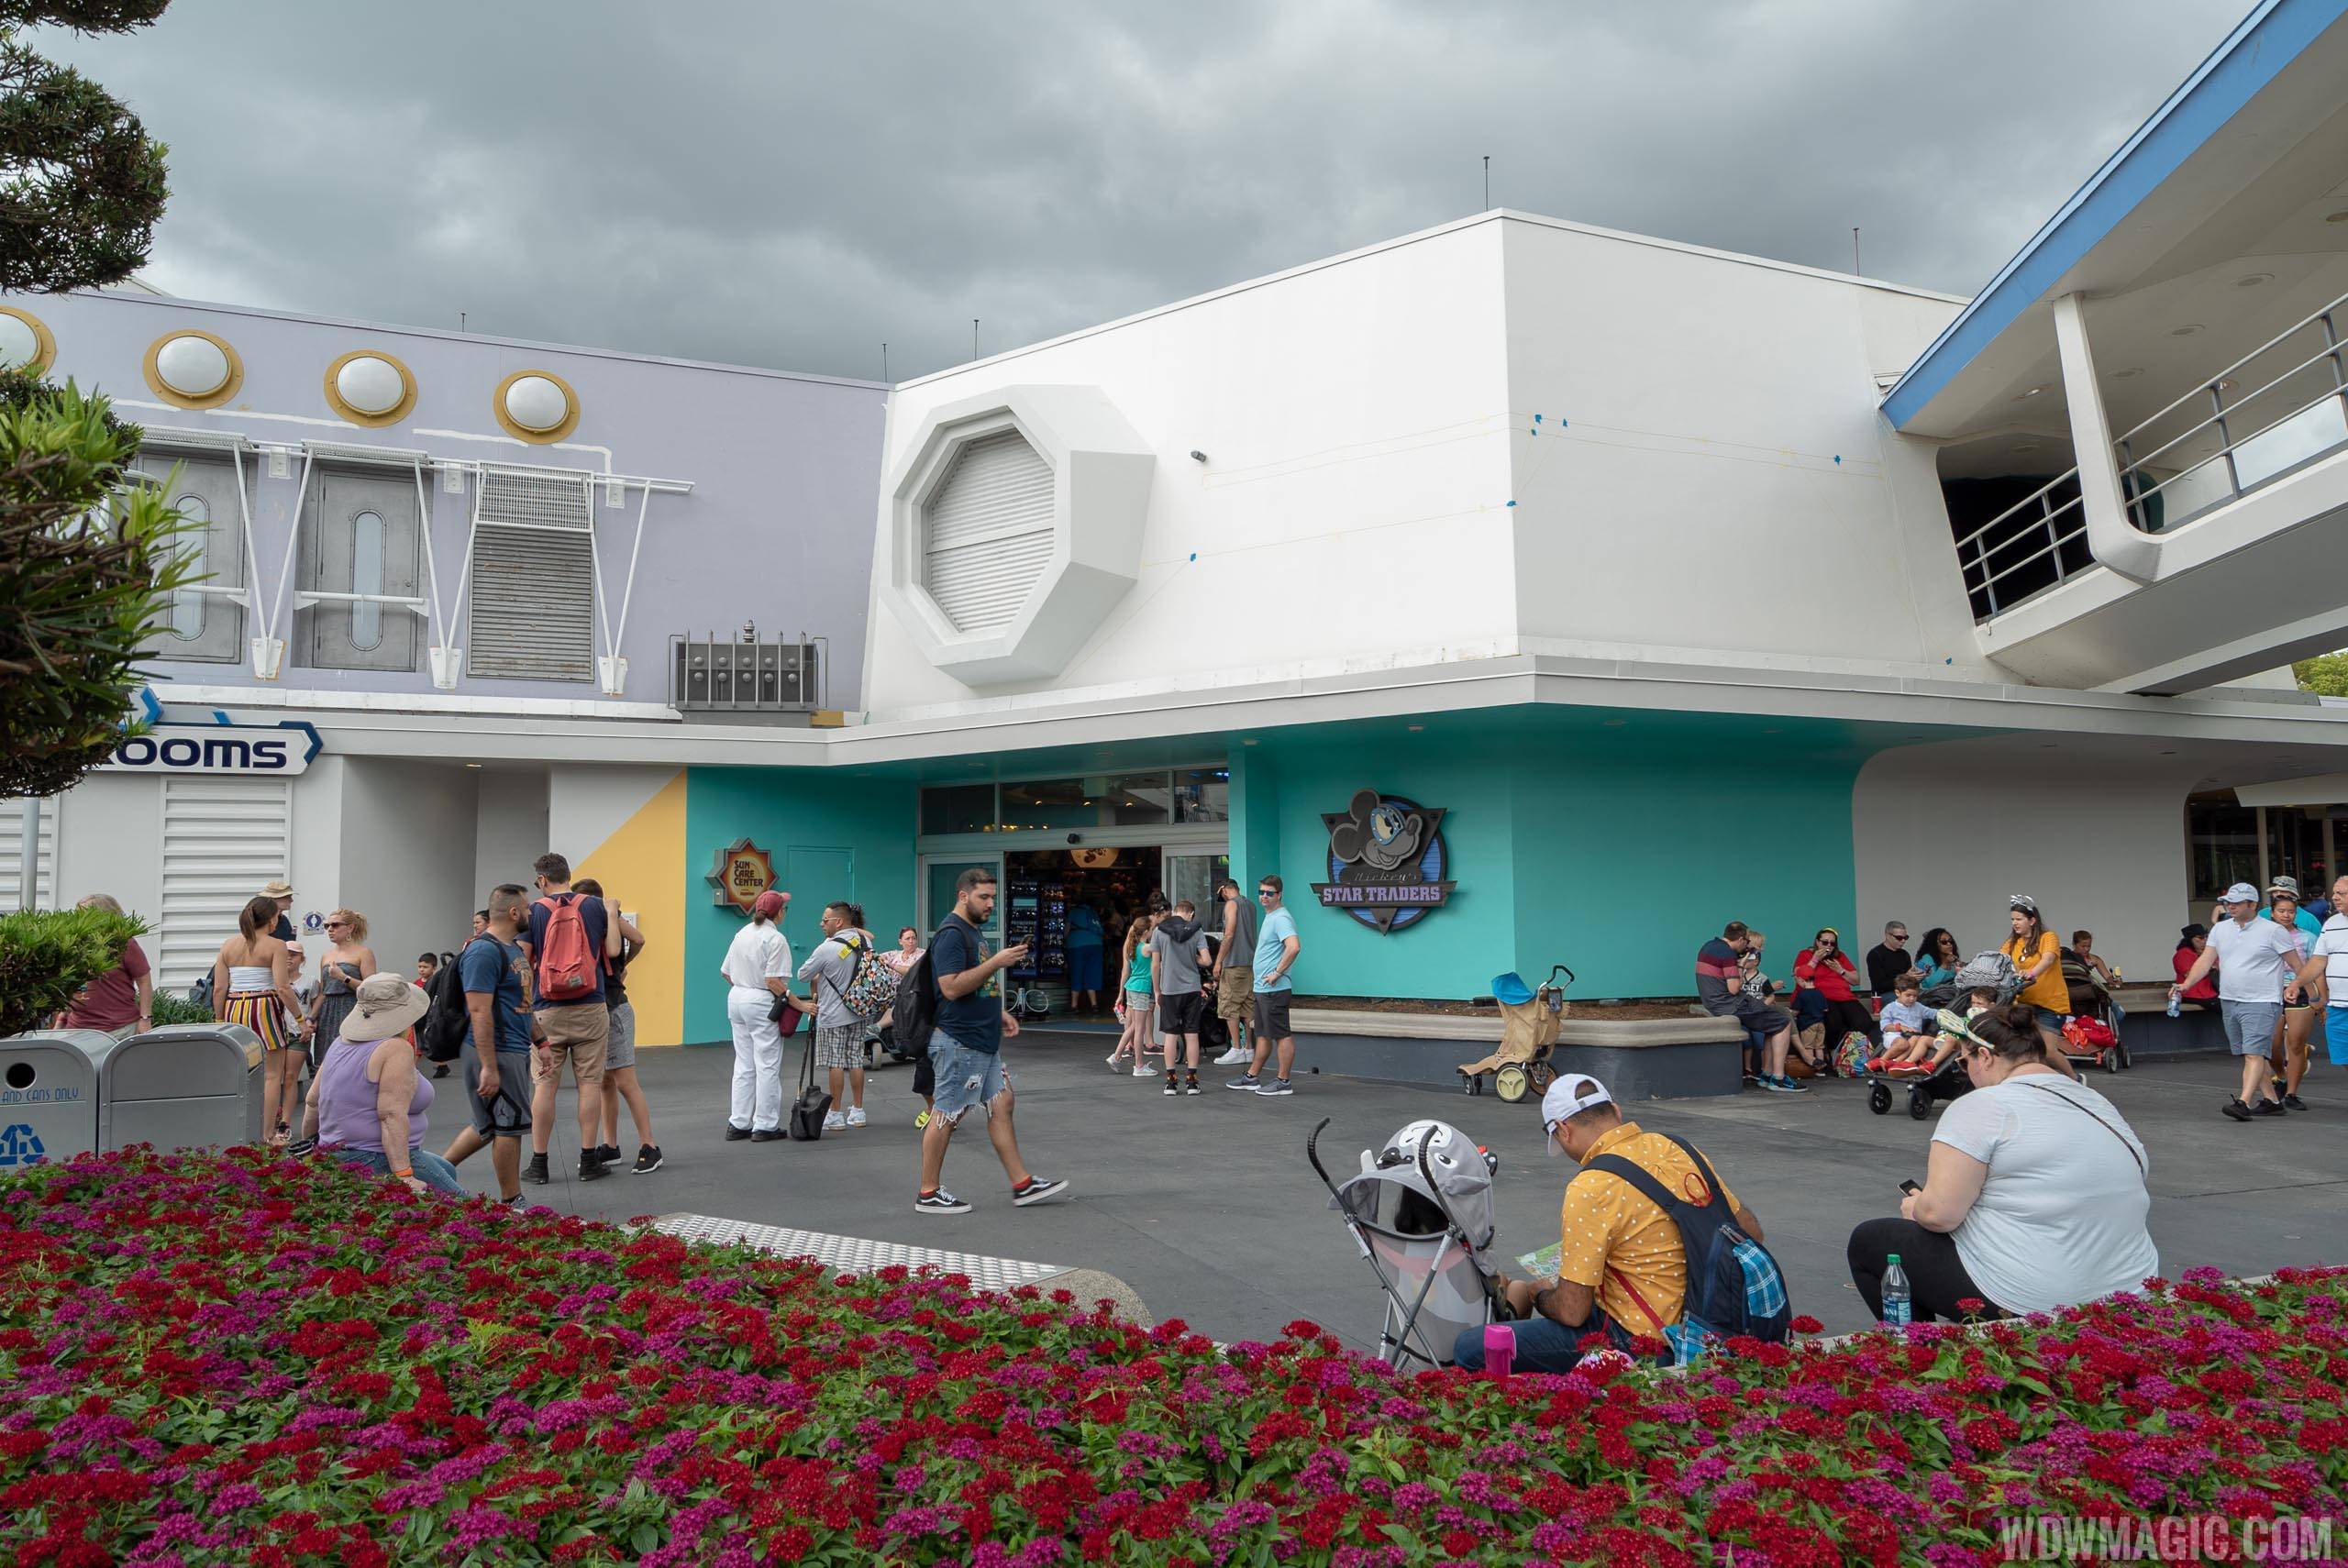 Tomorrowland paint changes around Mickey's Star Traders - April 2019